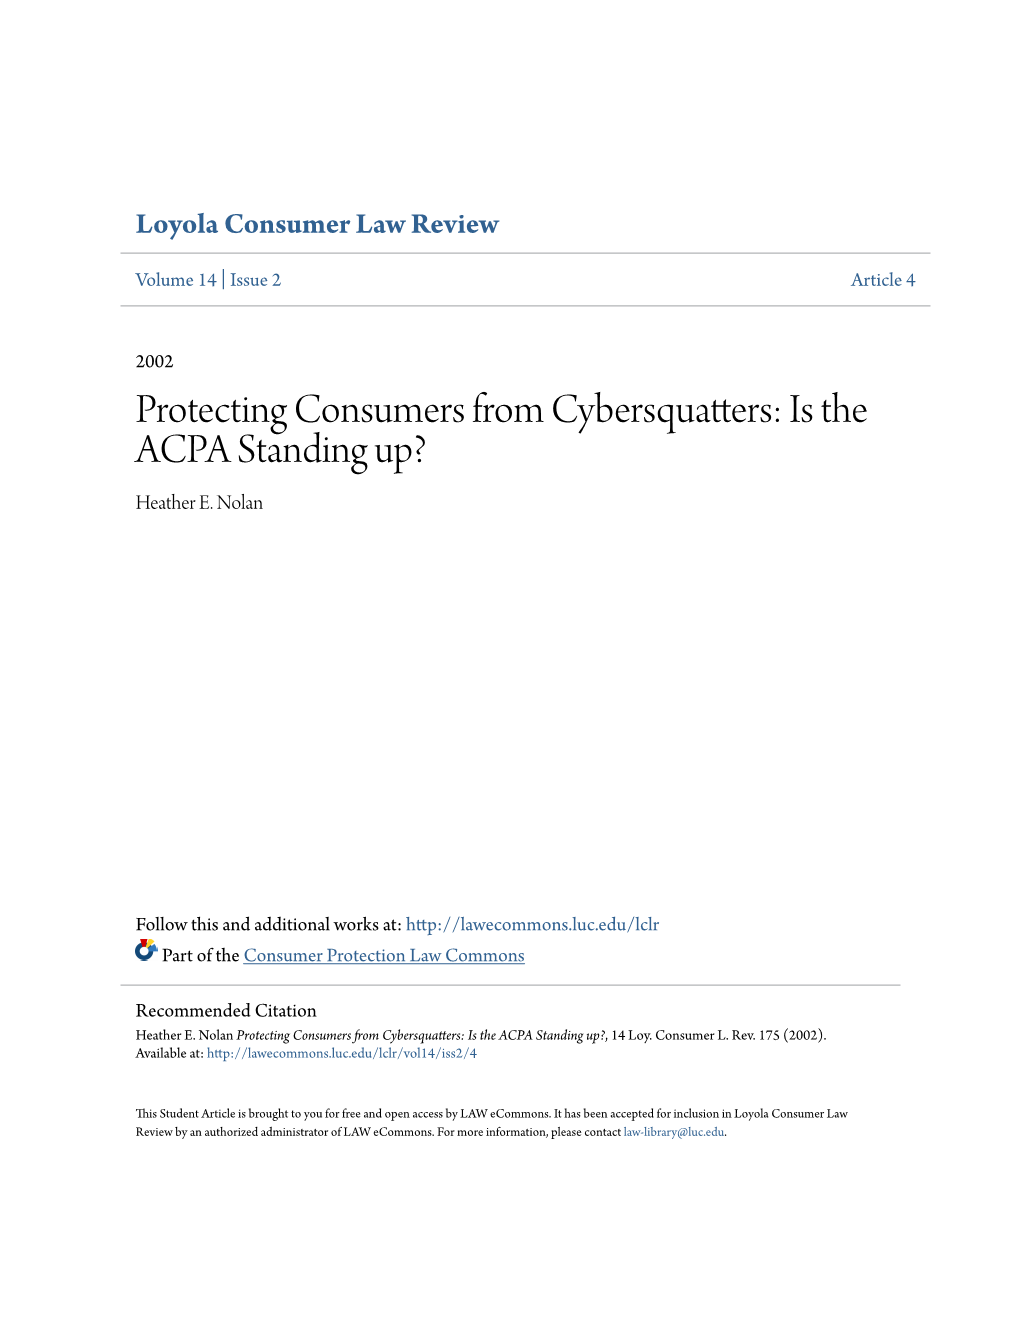 Protecting Consumers from Cybersquatters: Is the ACPA Standing Up? Heather E